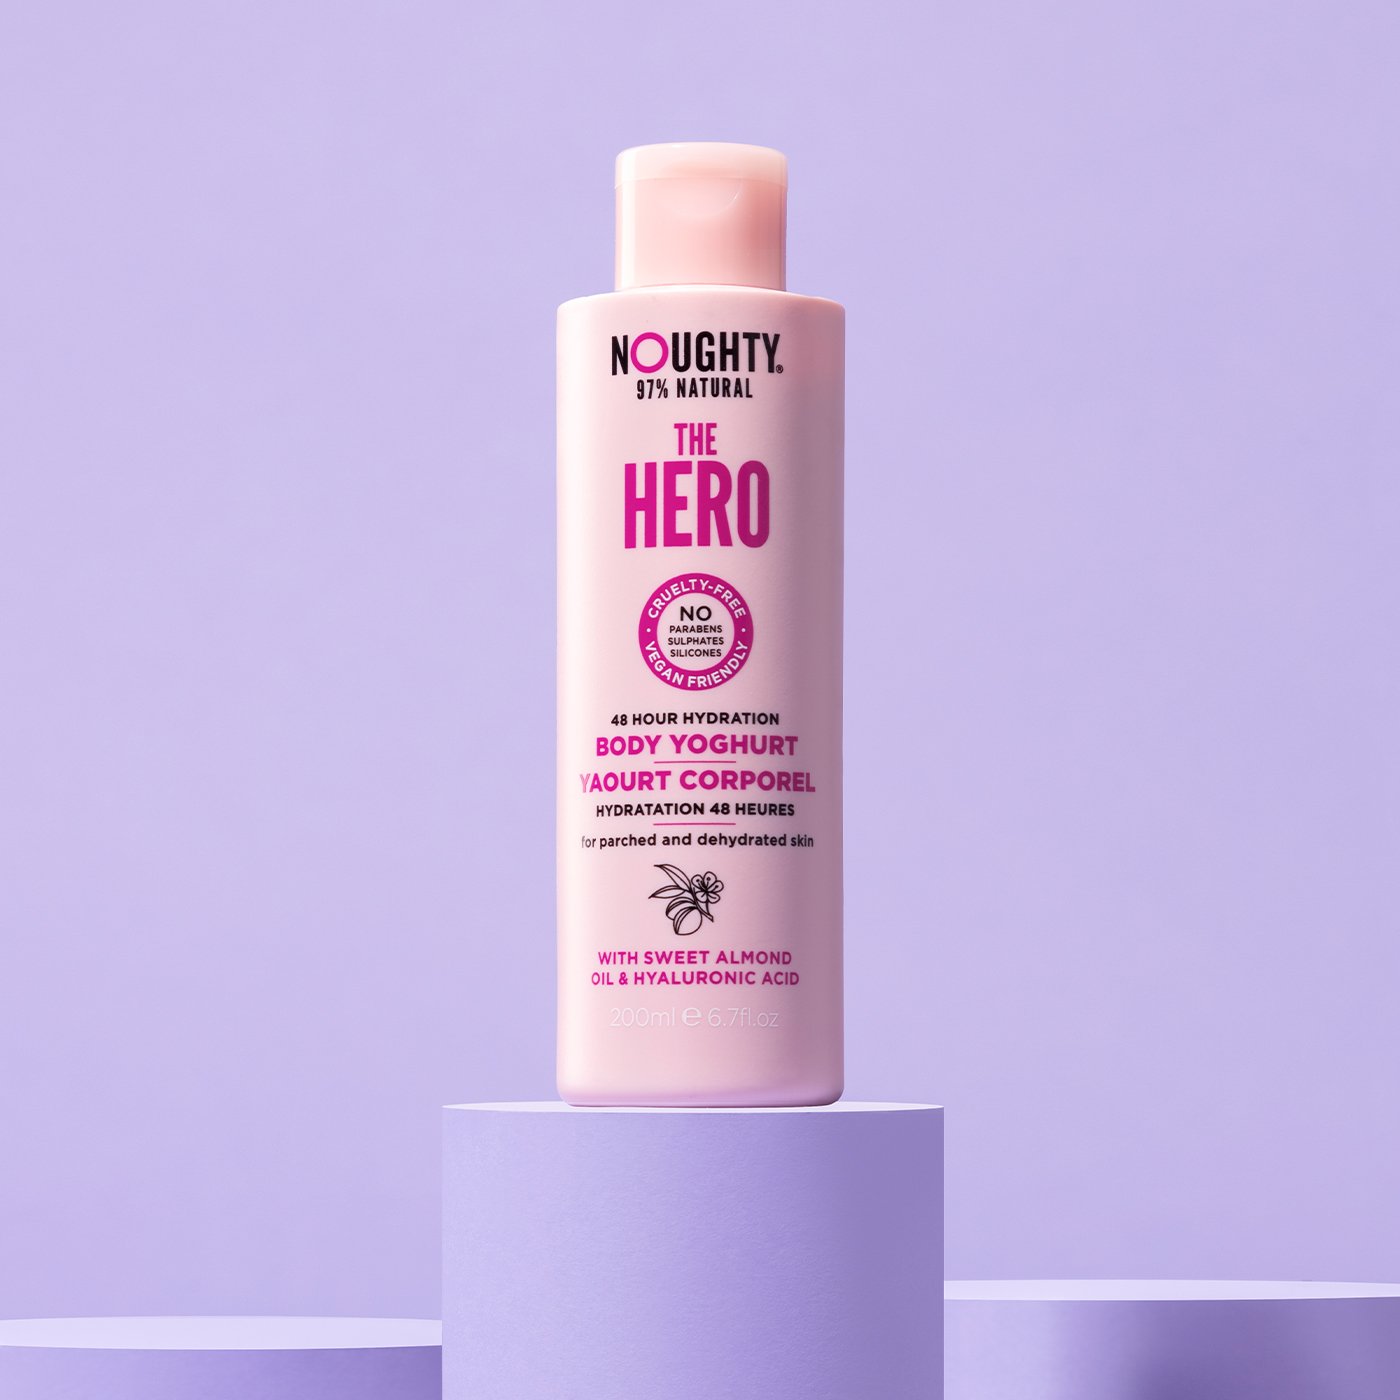 Noughty The Hero 48 hour hydrating body yoghurt for parched and dehydrated skin. Natural body care vegan cruelty free natural sulfate free paraben free